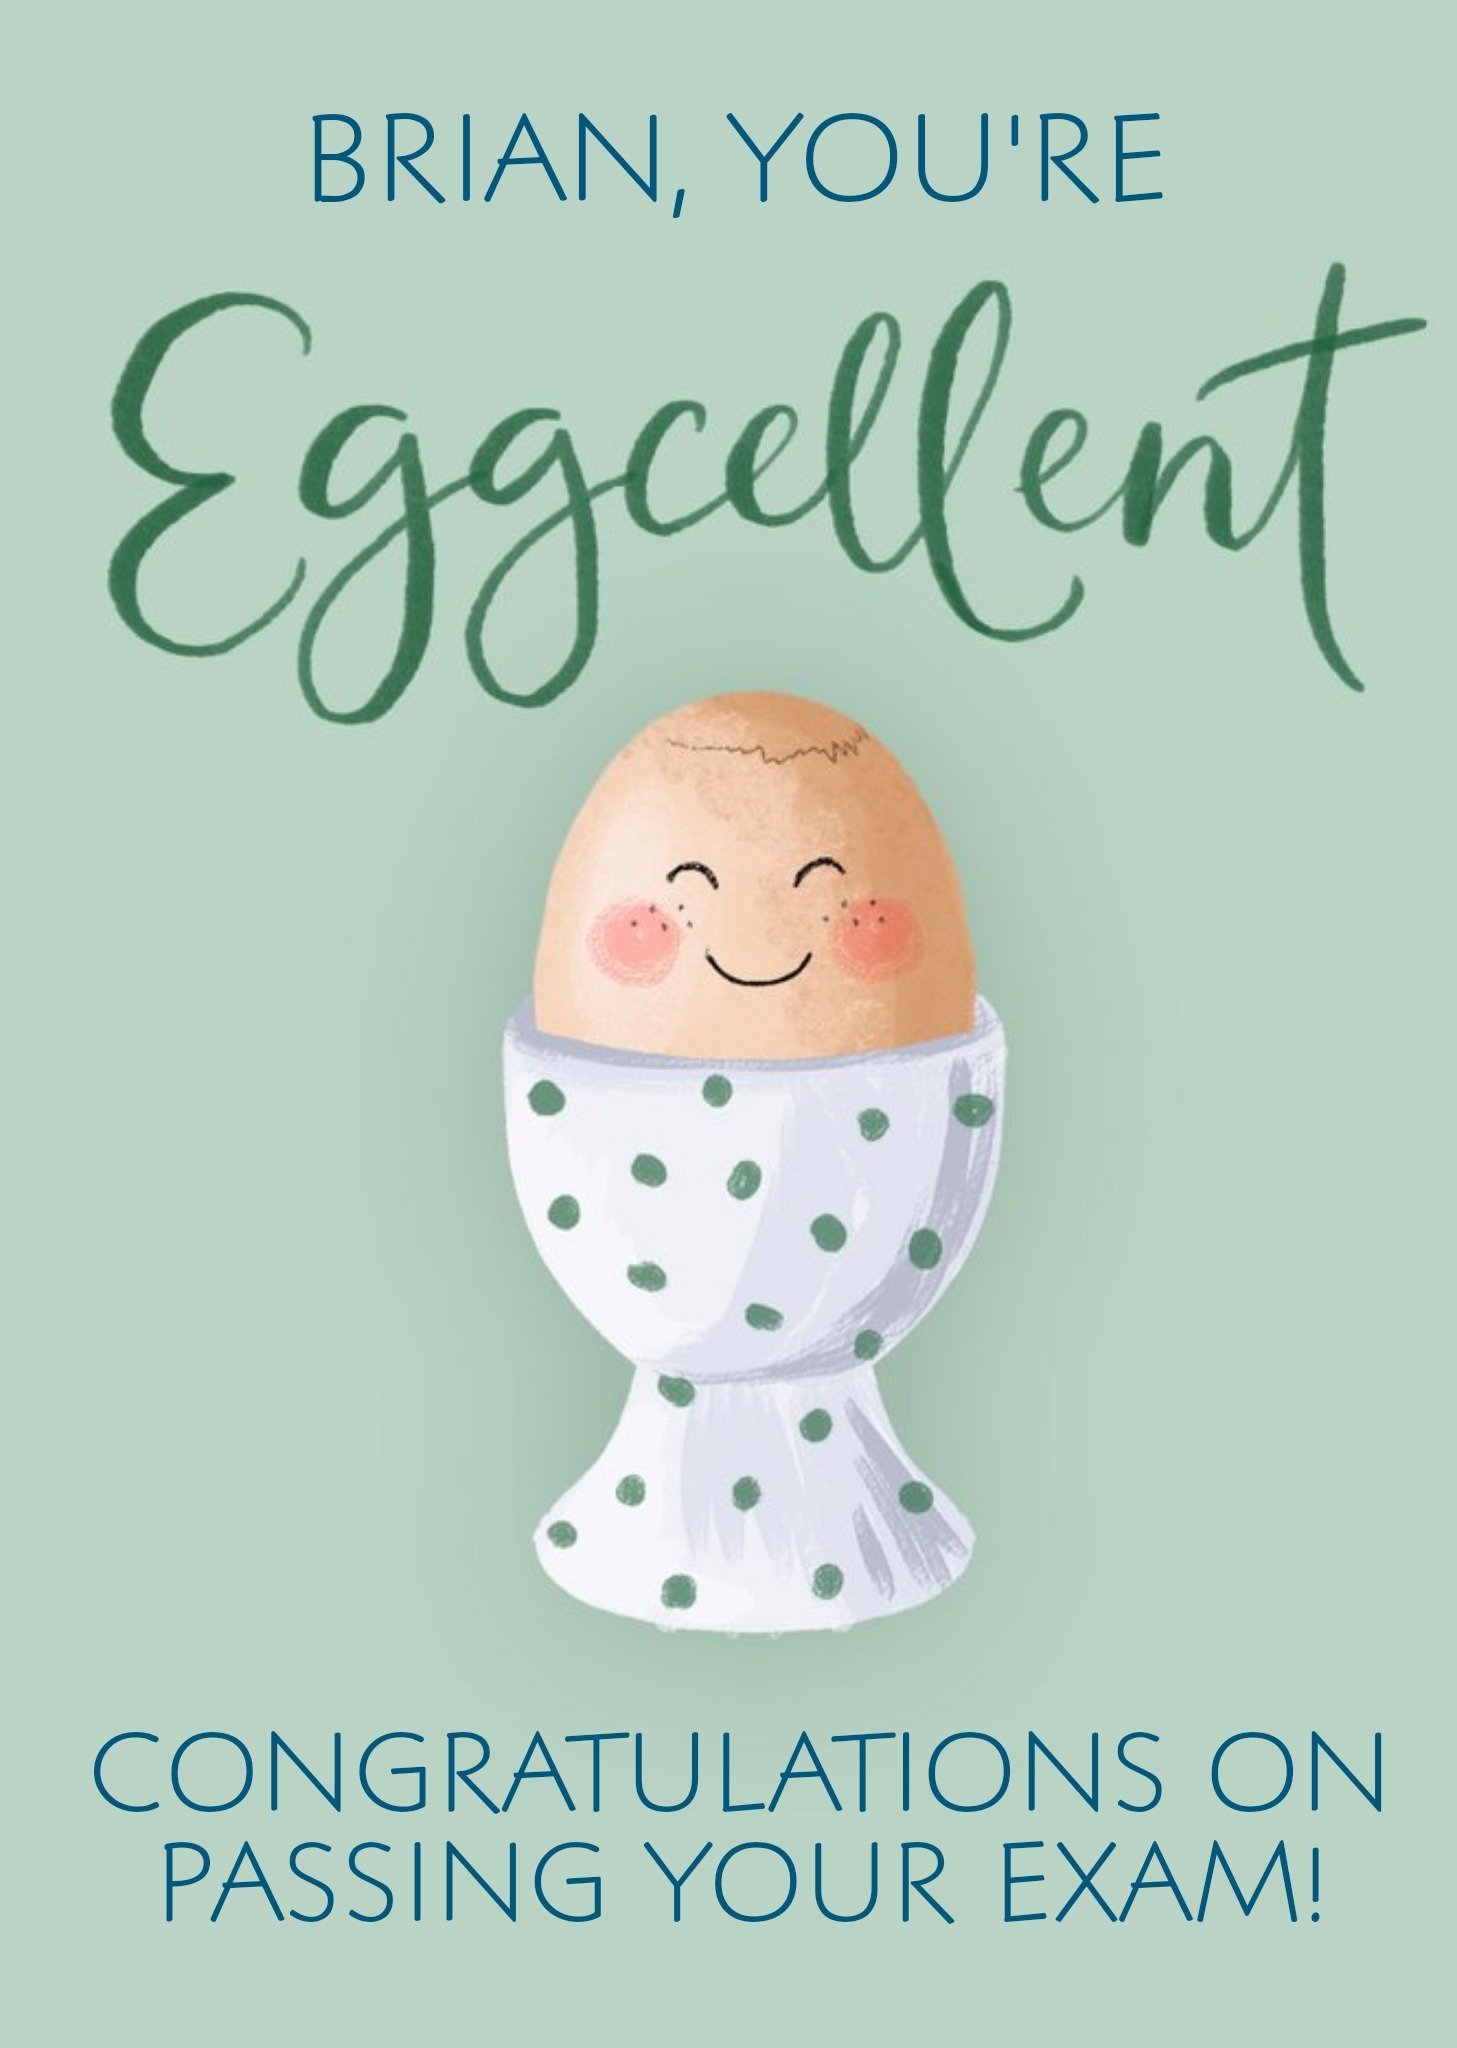 Moonpig Illustration Of A Smiling Egg On A Light Green Background Congratulations On Your Exams Card